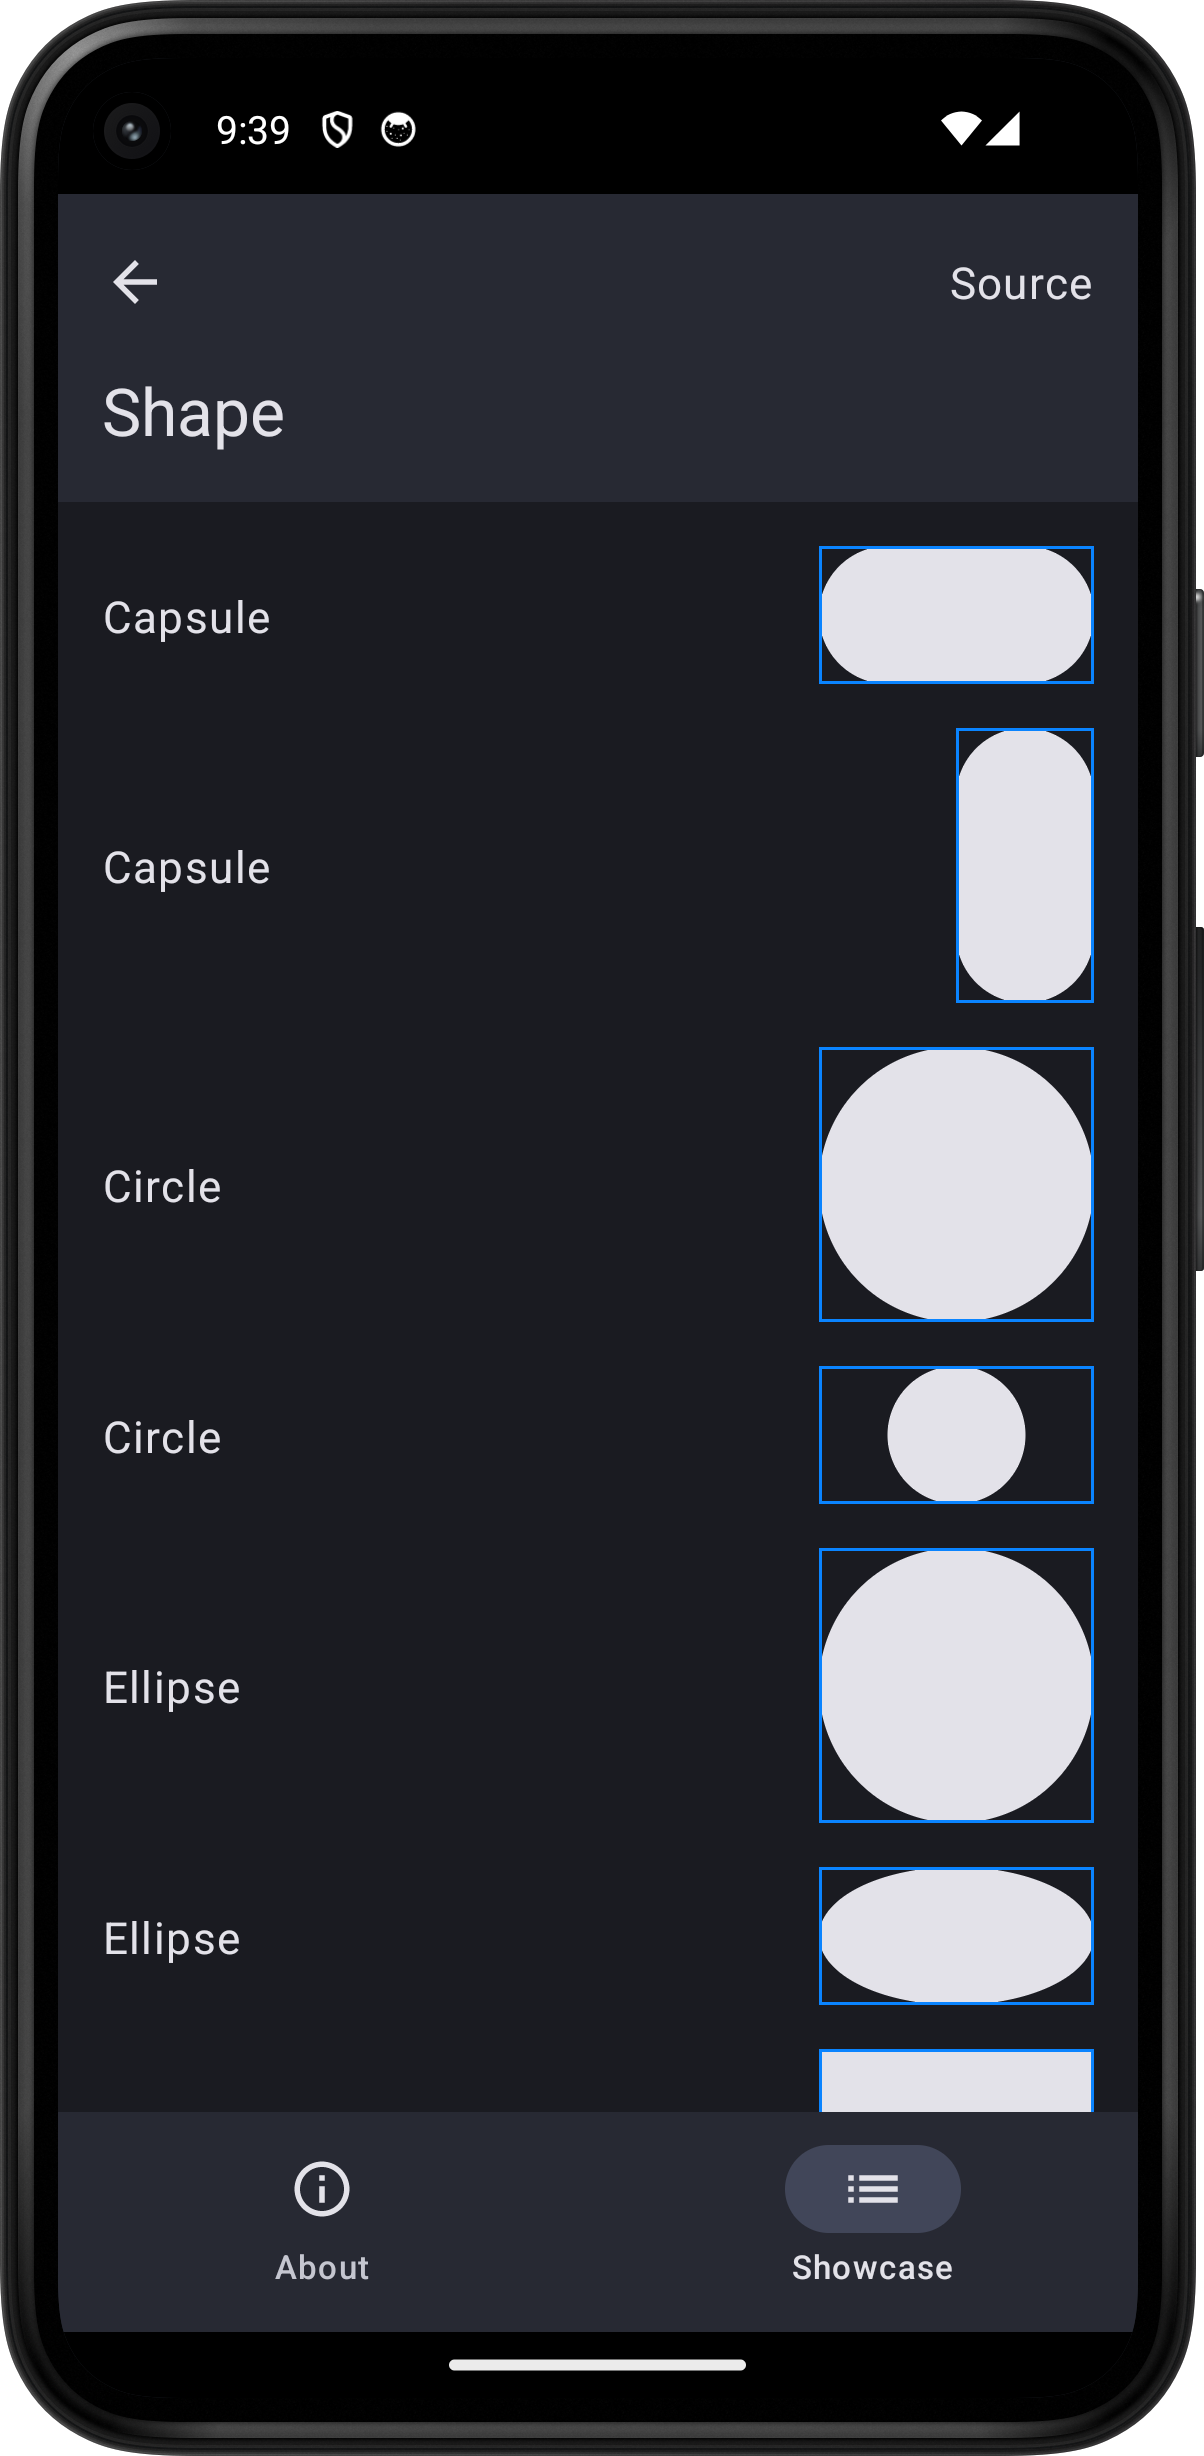 Android screenshot for Shape component (dark mode)